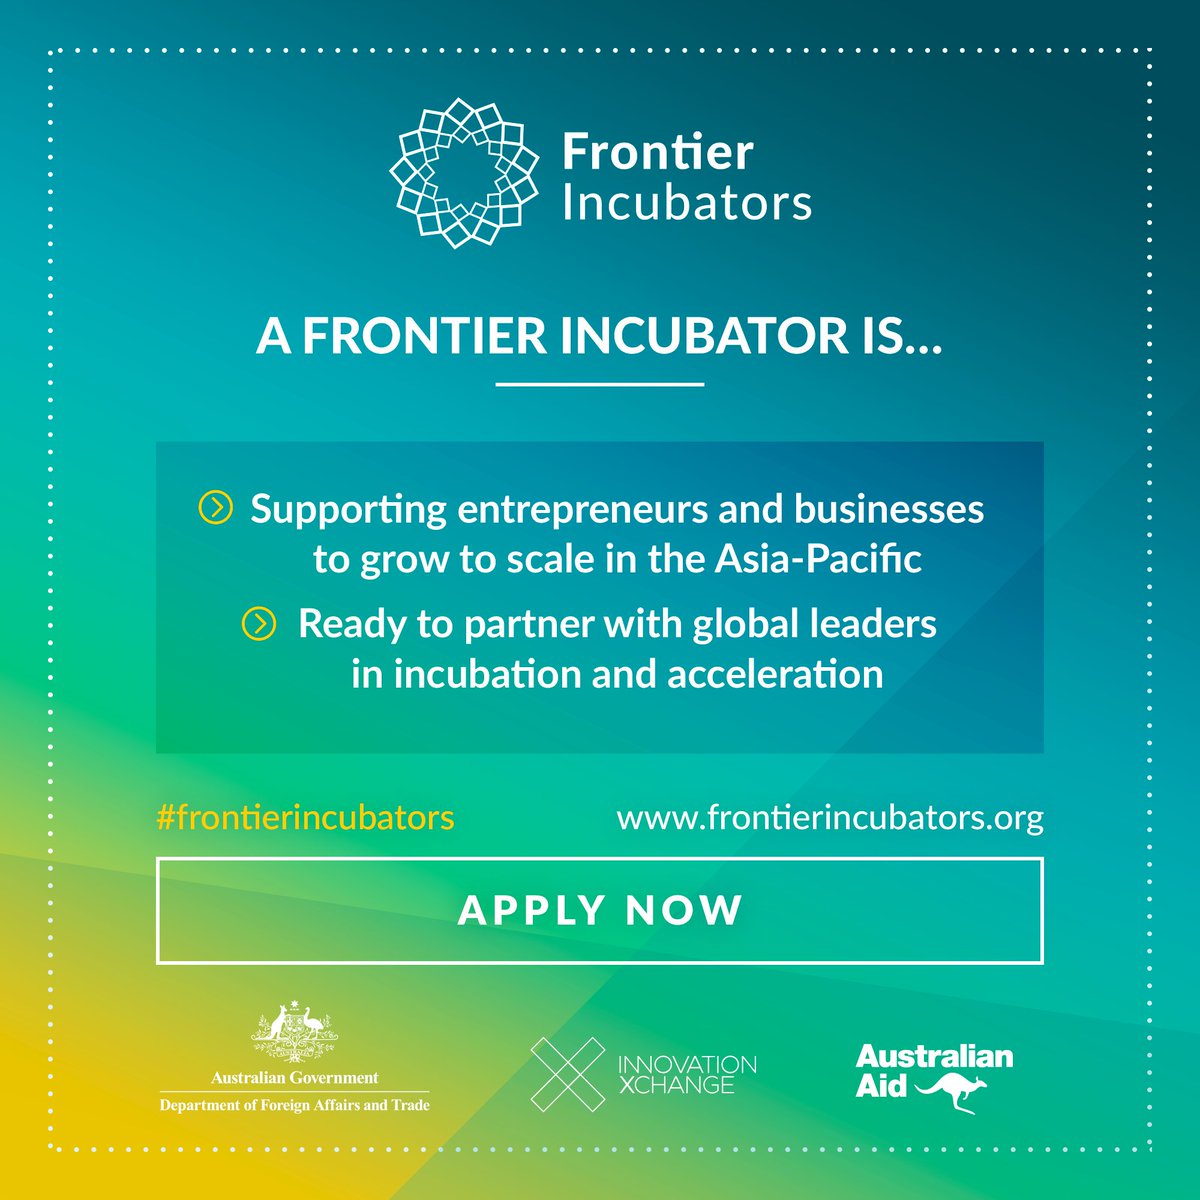 #frontierincubators has launched, and we can’t wait to see your applications due July 31! Help build the capabilities of #incubators and #accelerators in the Asia-Pacific #impact @dfat_ixc @theconveners @MillerSocent